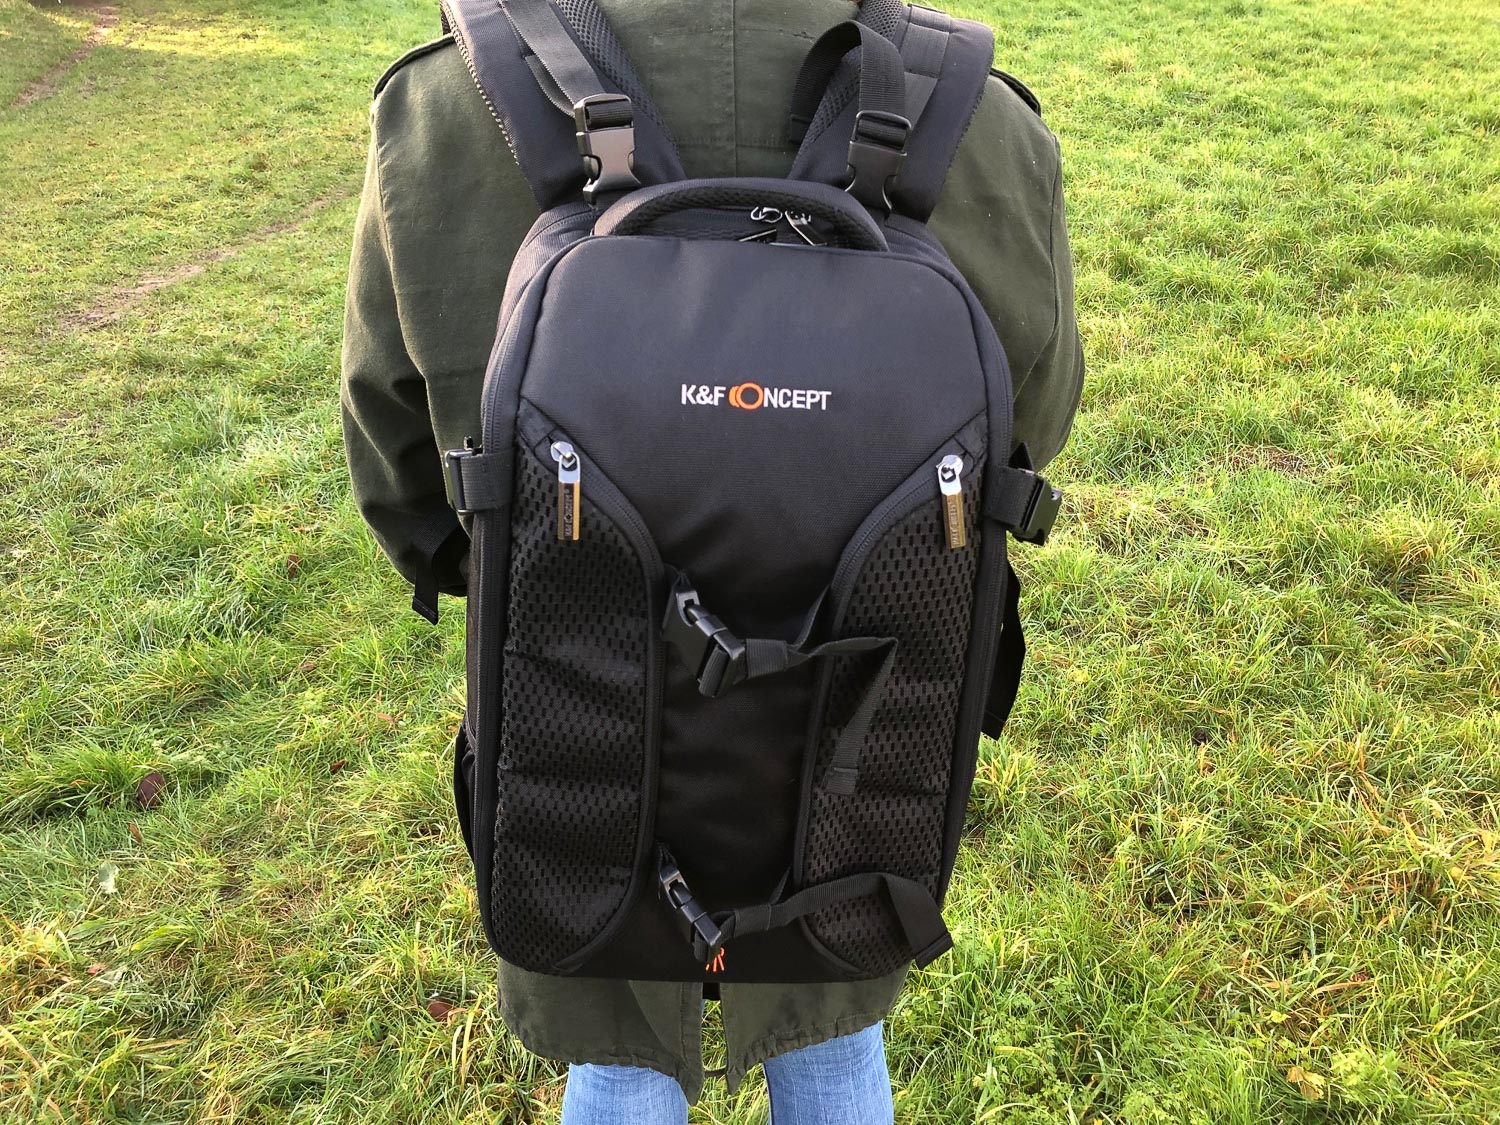 k f concept gear review Camera Bags